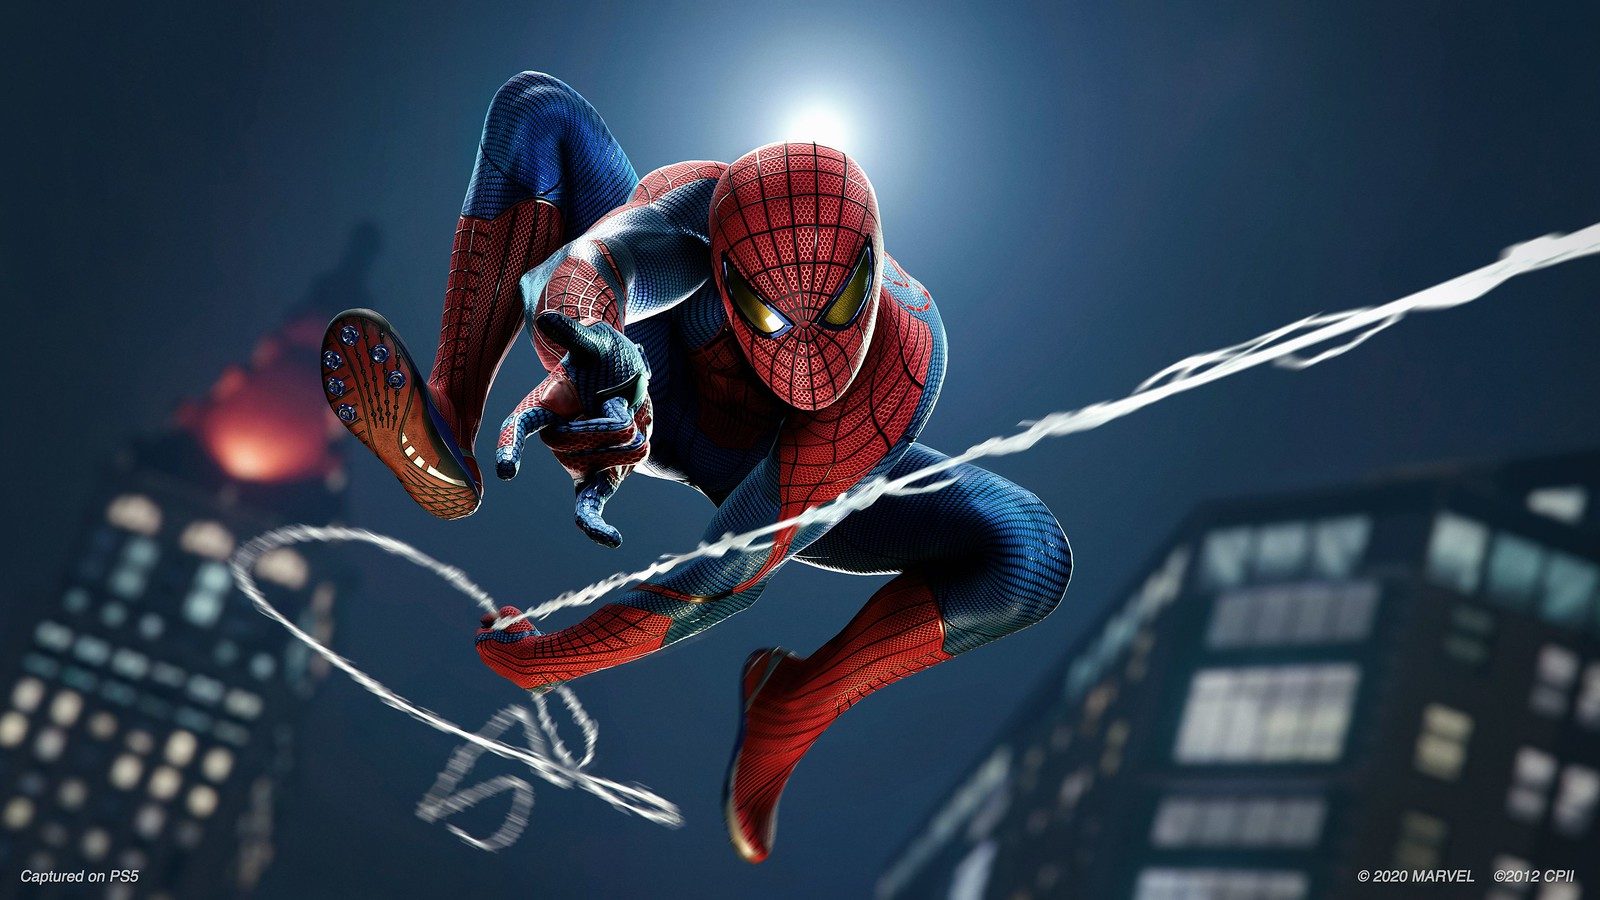 Marvel's Spider-Man 2 Breaks Sales Records to Become Fastest-selling  PlayStation Studios Game in PlayStation History - Sony Interactive  Entertainment